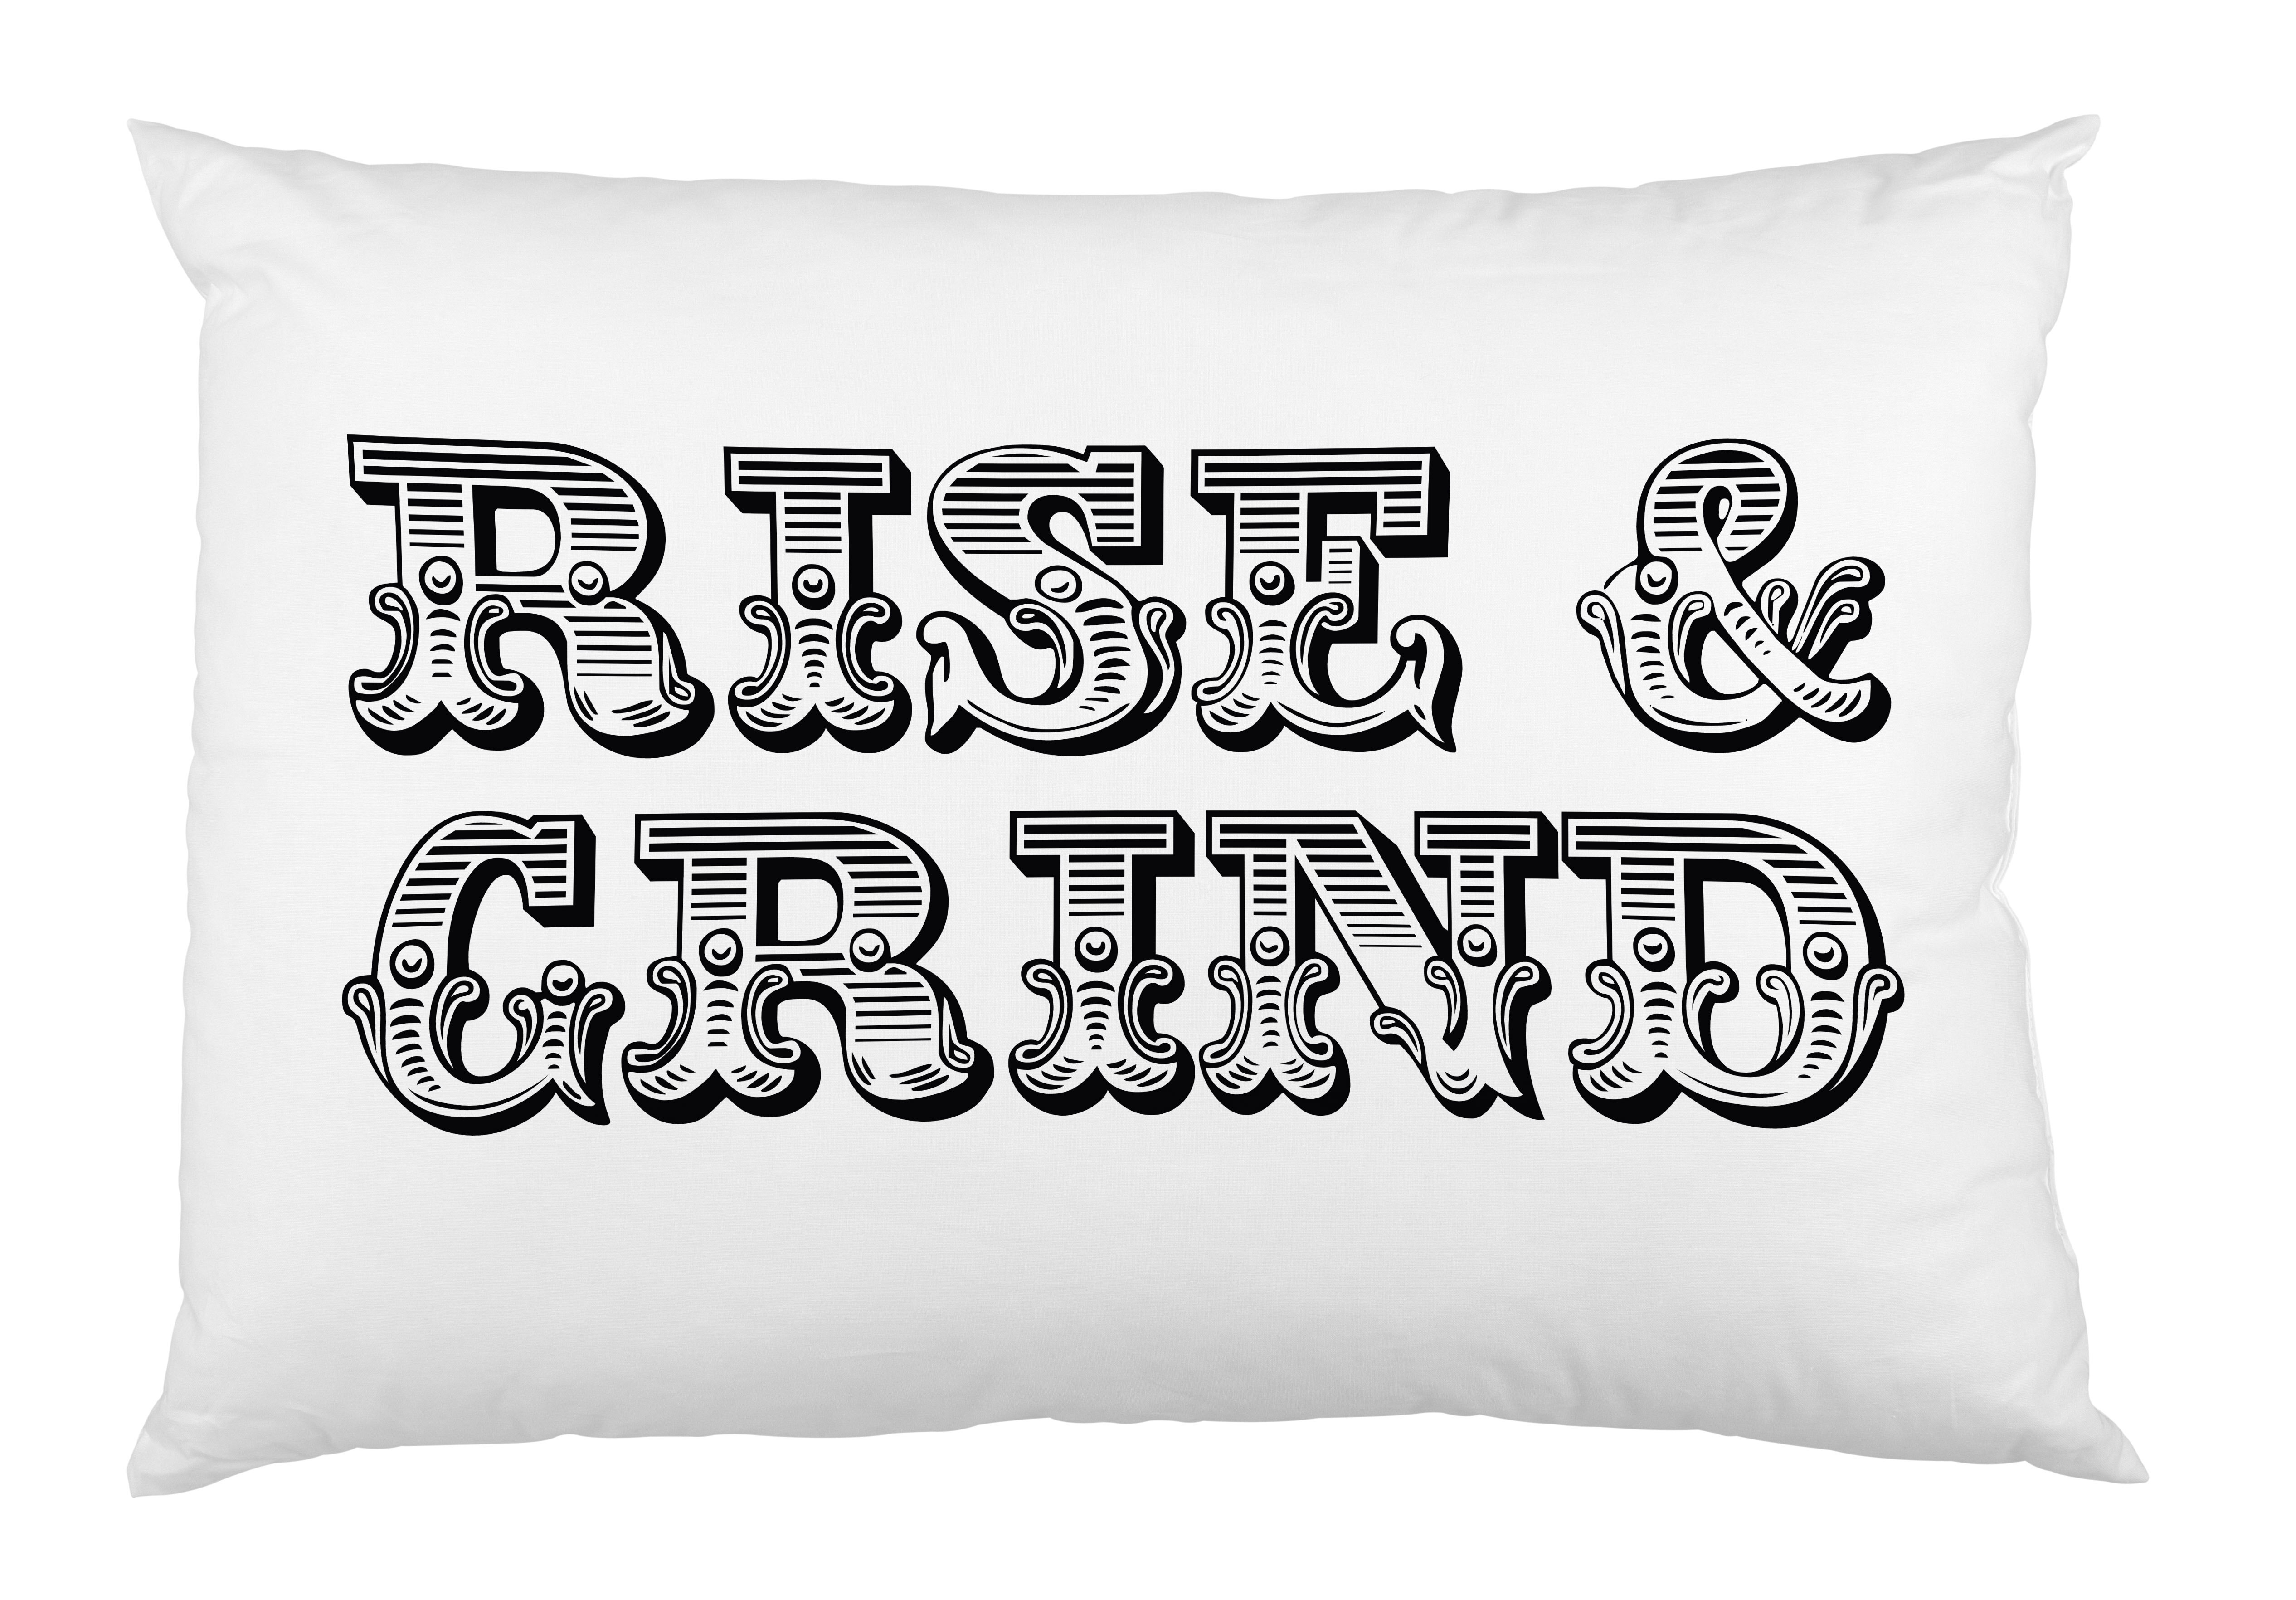 Grind on pillow